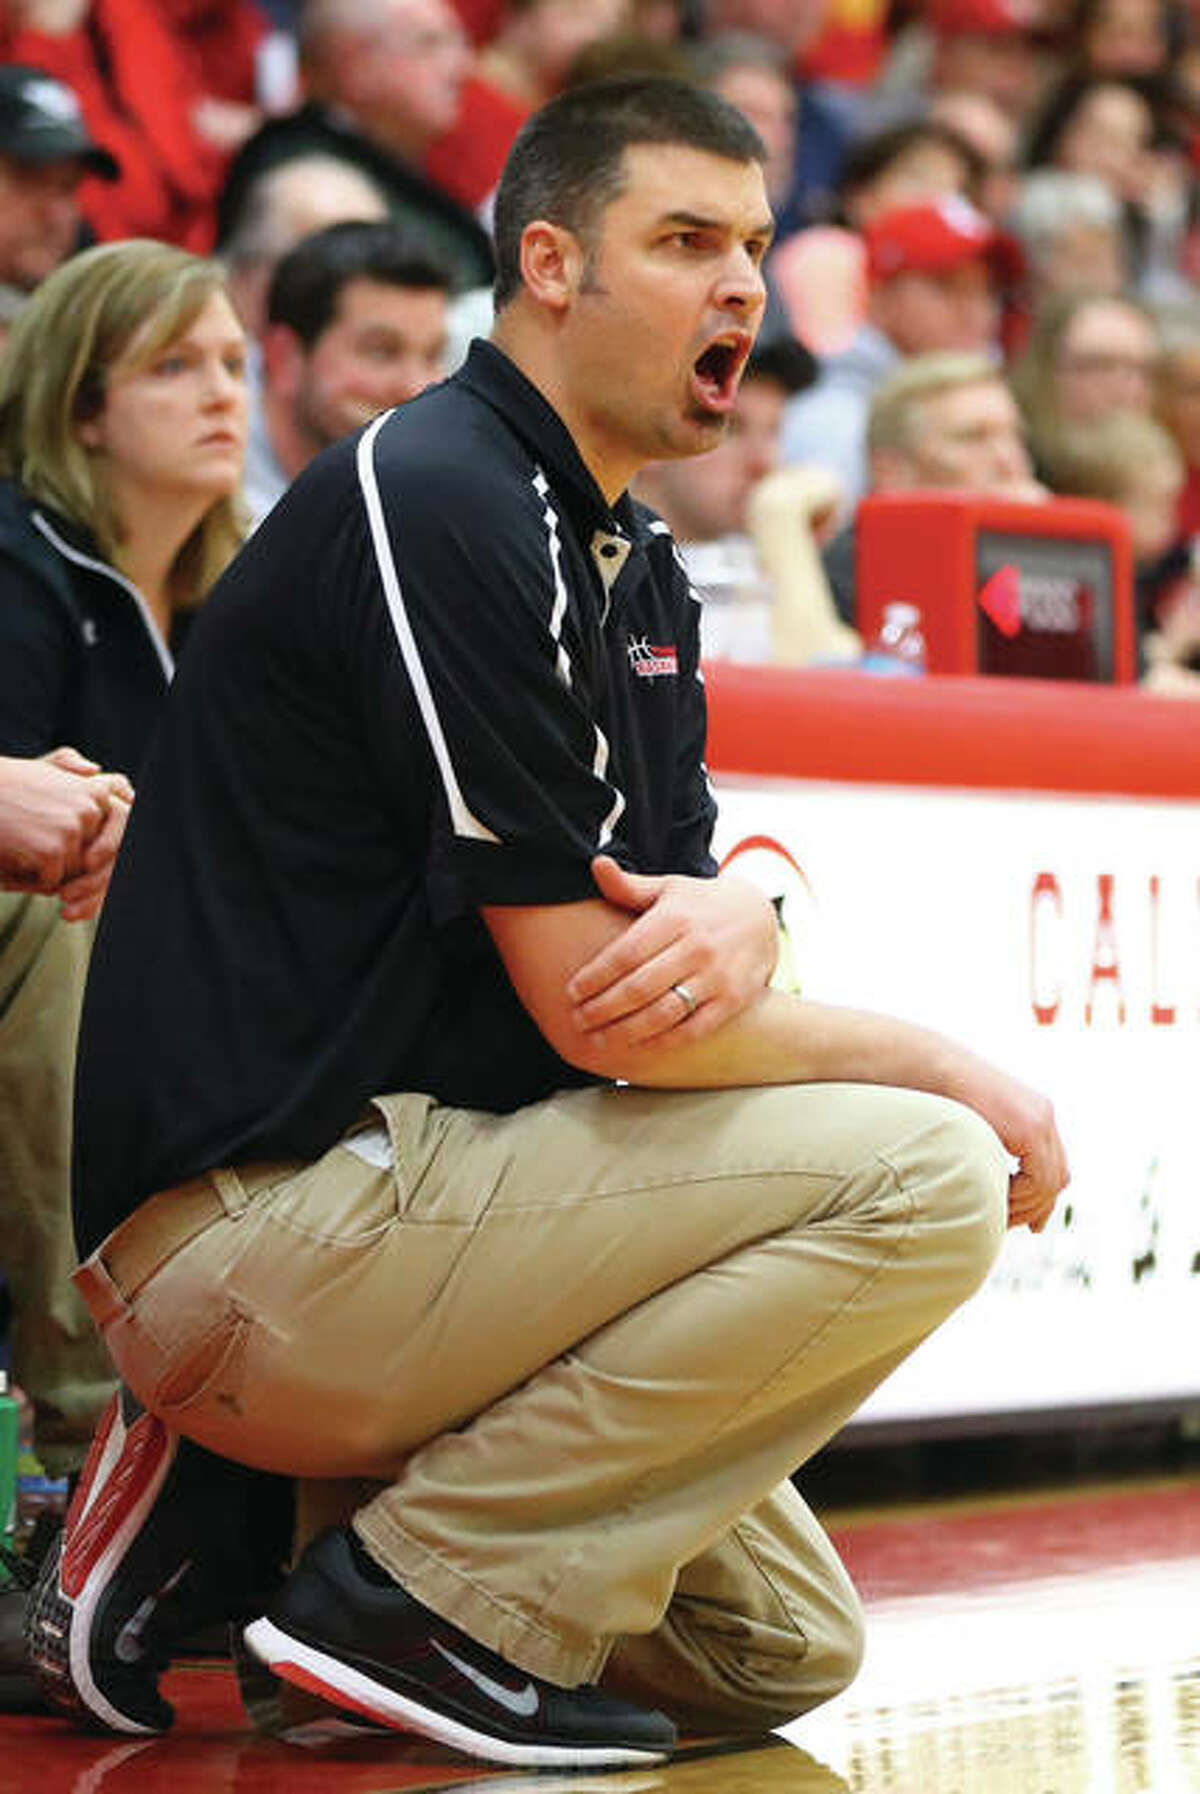 Calhoun coach Aaron Baalman shouts instruction from the bench during the Warriors’ victory over No. 1-ranked Lebanon in the Calhoun Class 1A Sectional title game on Feb. 14 in Hardin. Baalman announced his decision to resign as Calhoun coach after eight seasons produced a 207-49 record with a state title from three state tourney appearances.